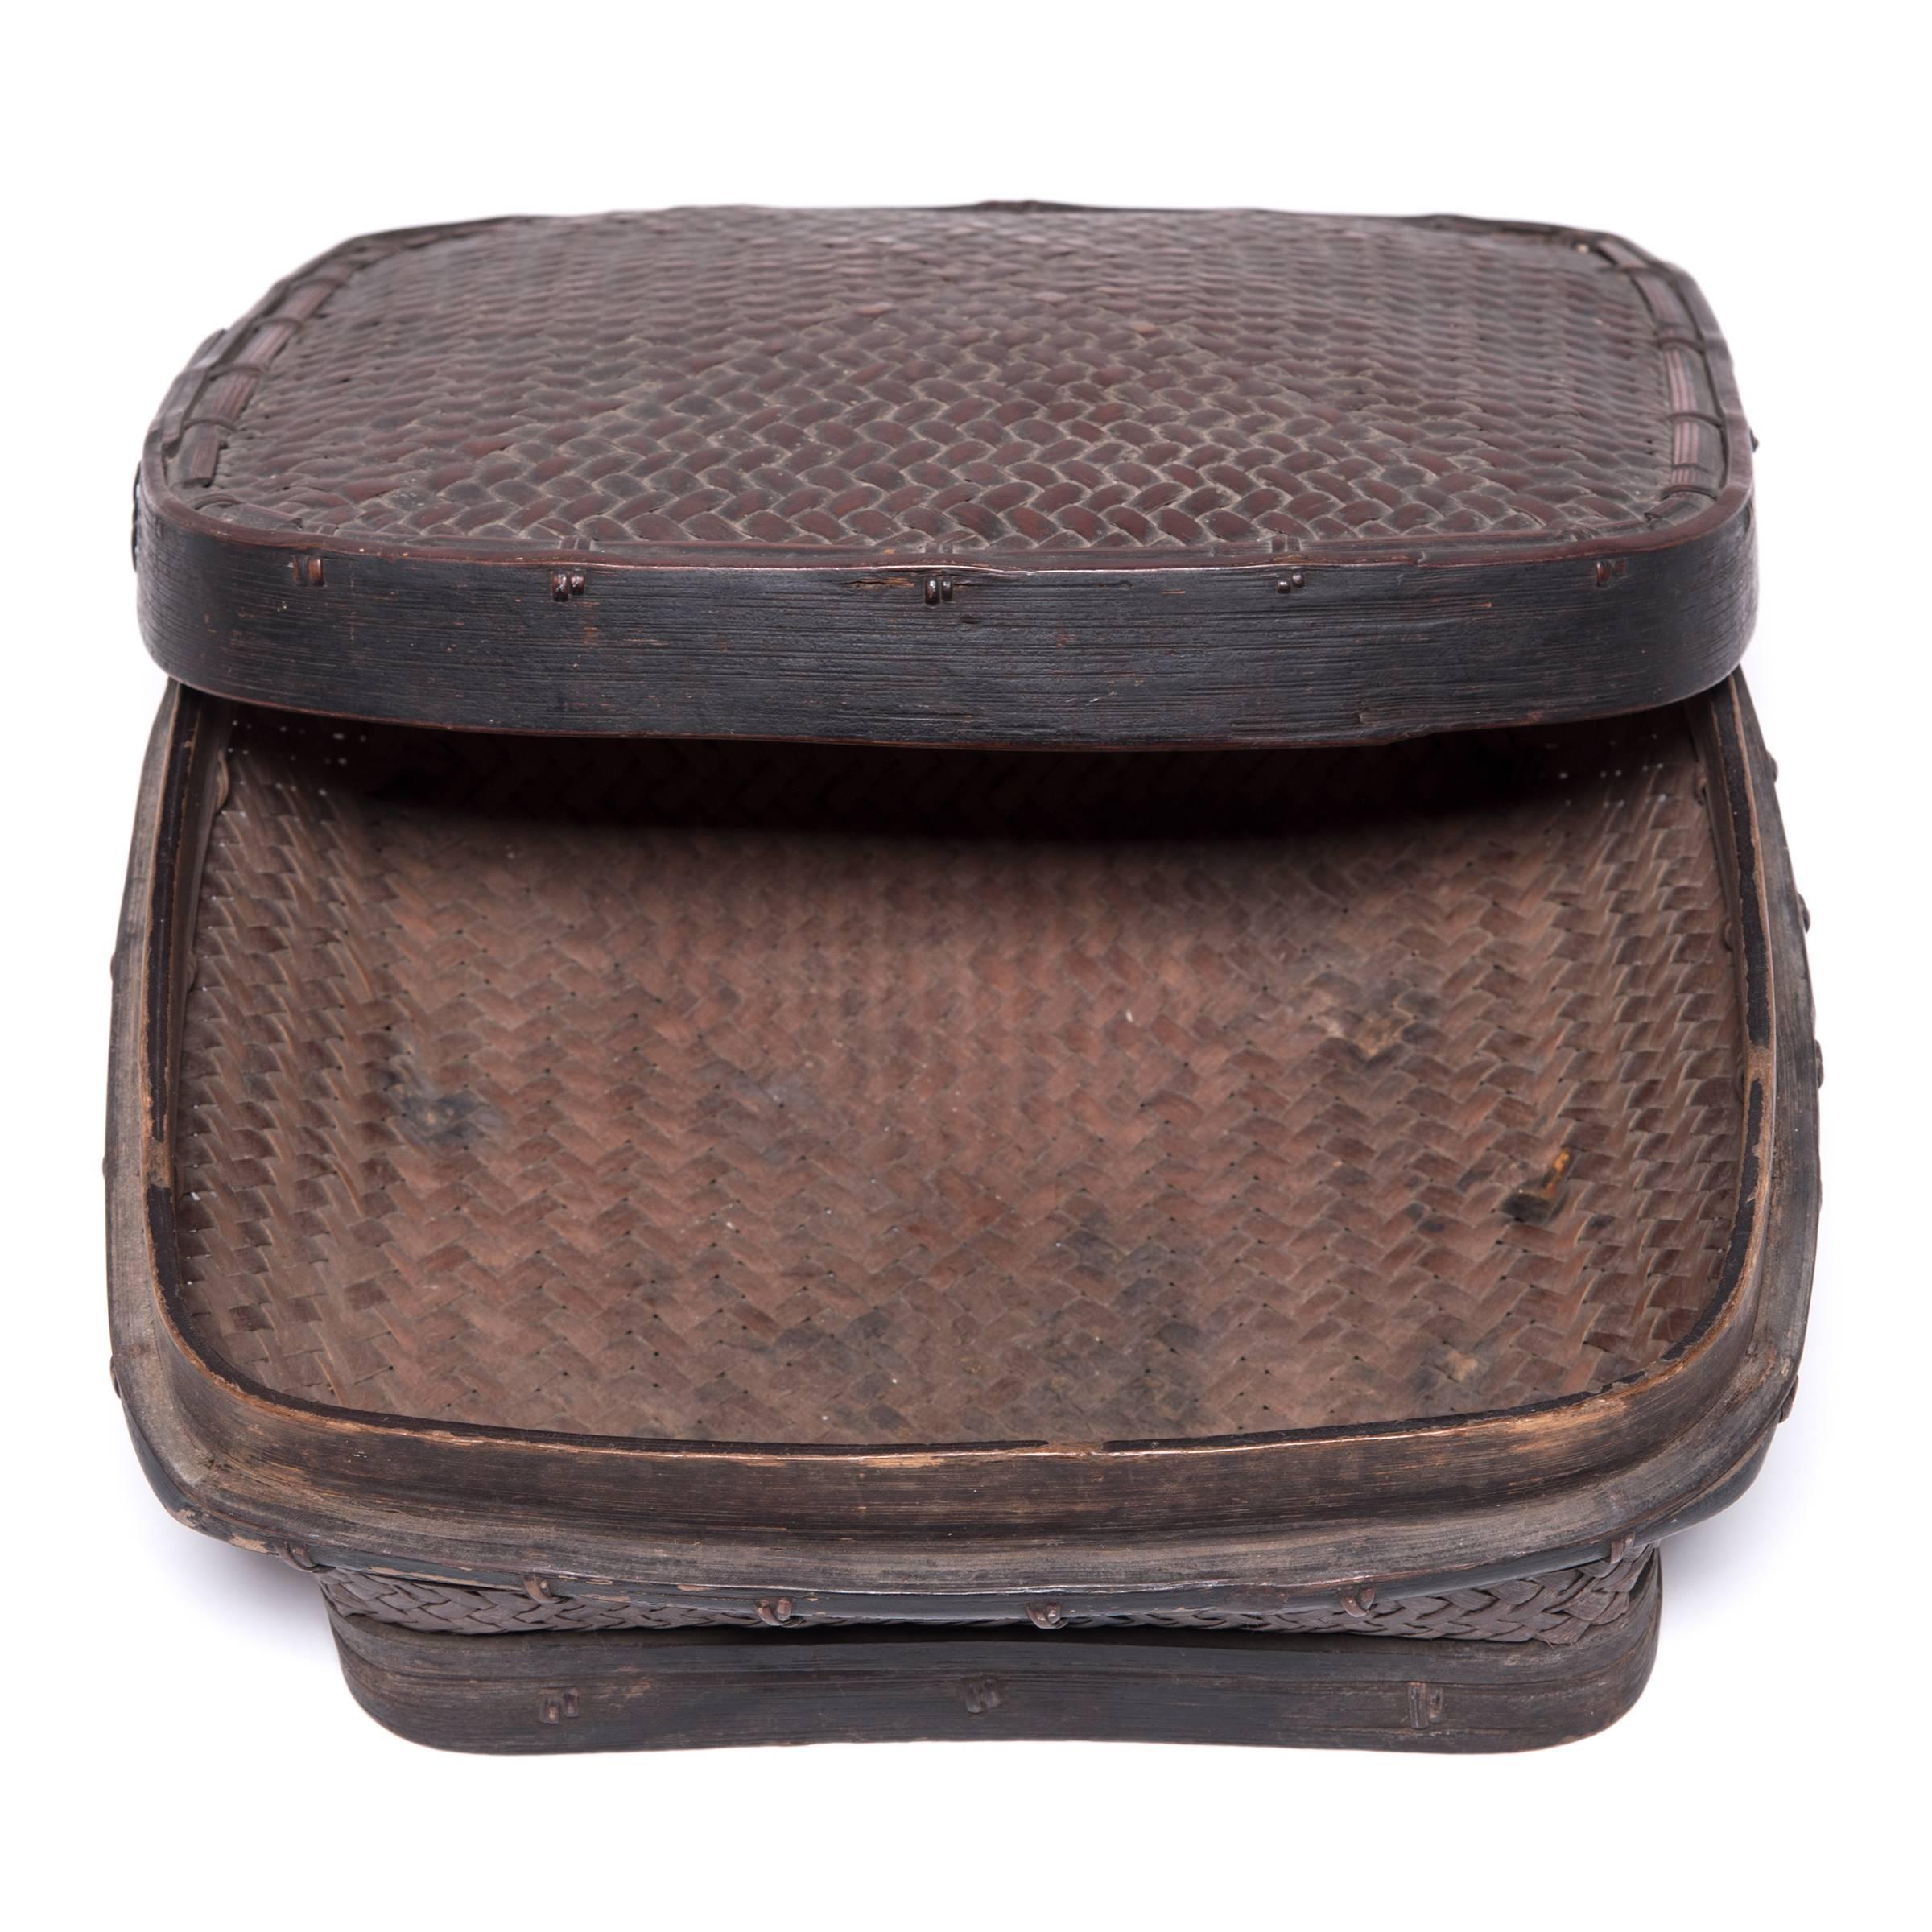 Woven Early 20th Century Filipino Lidded Square Basket